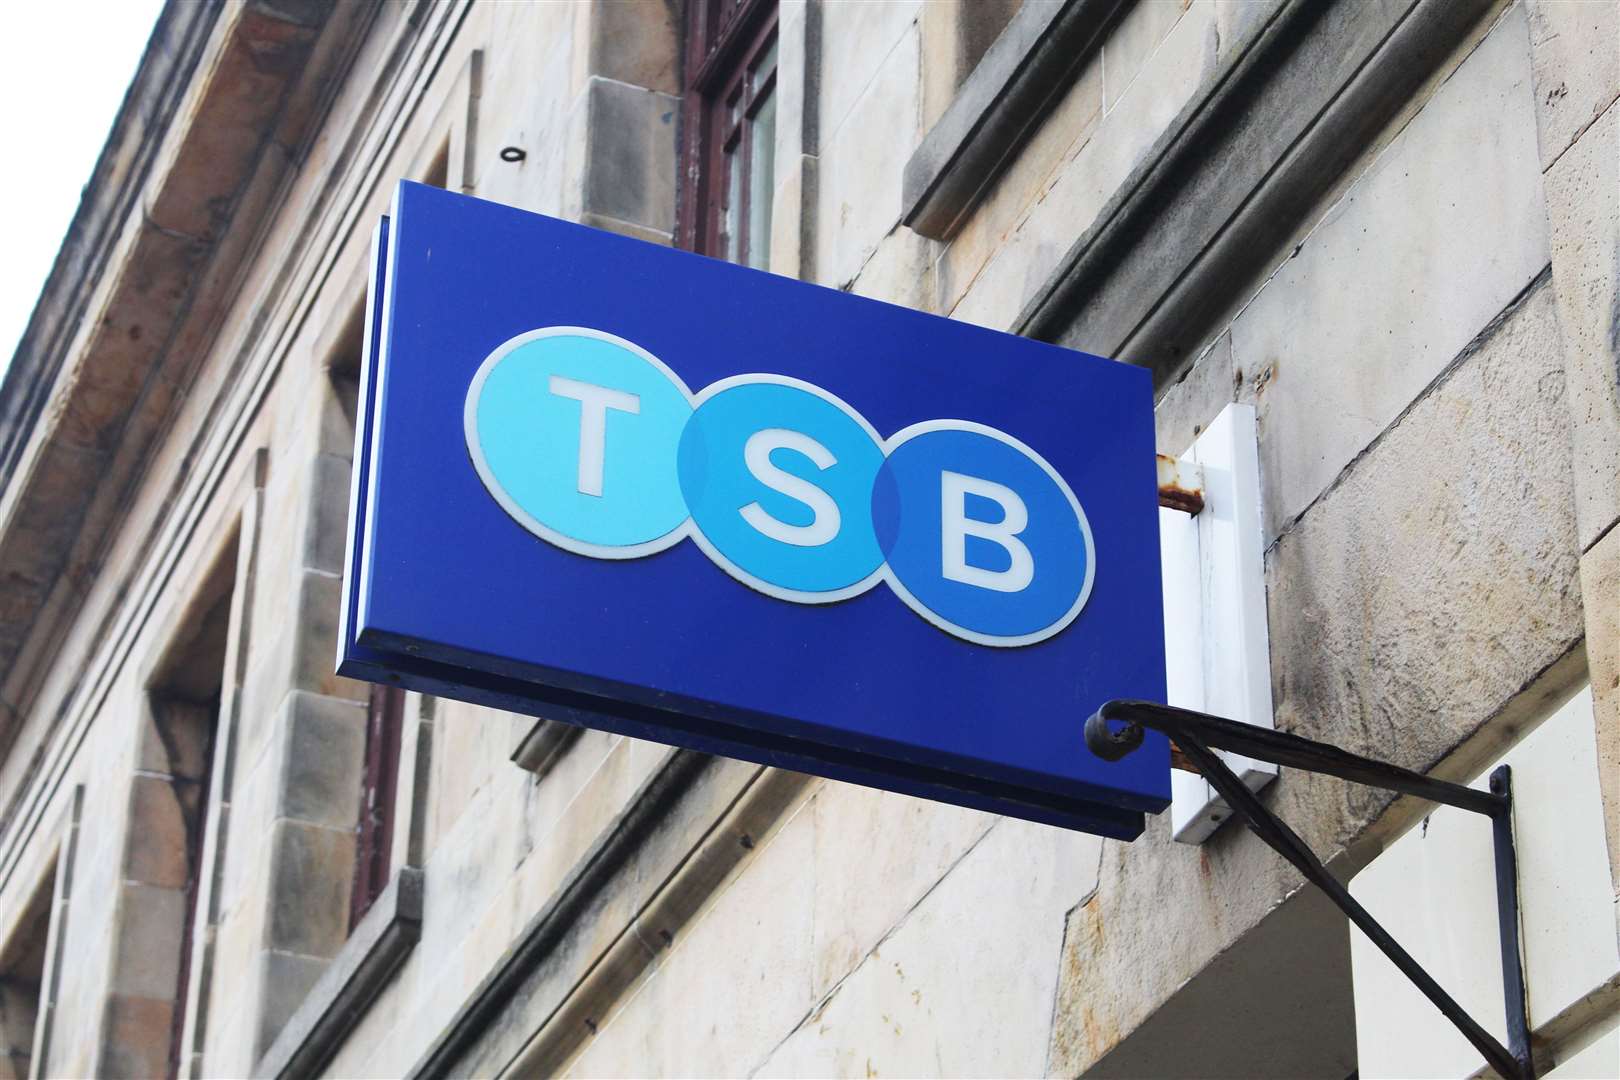 TSB is to reduce opening hours at branches across Scotland, including in Turriff.